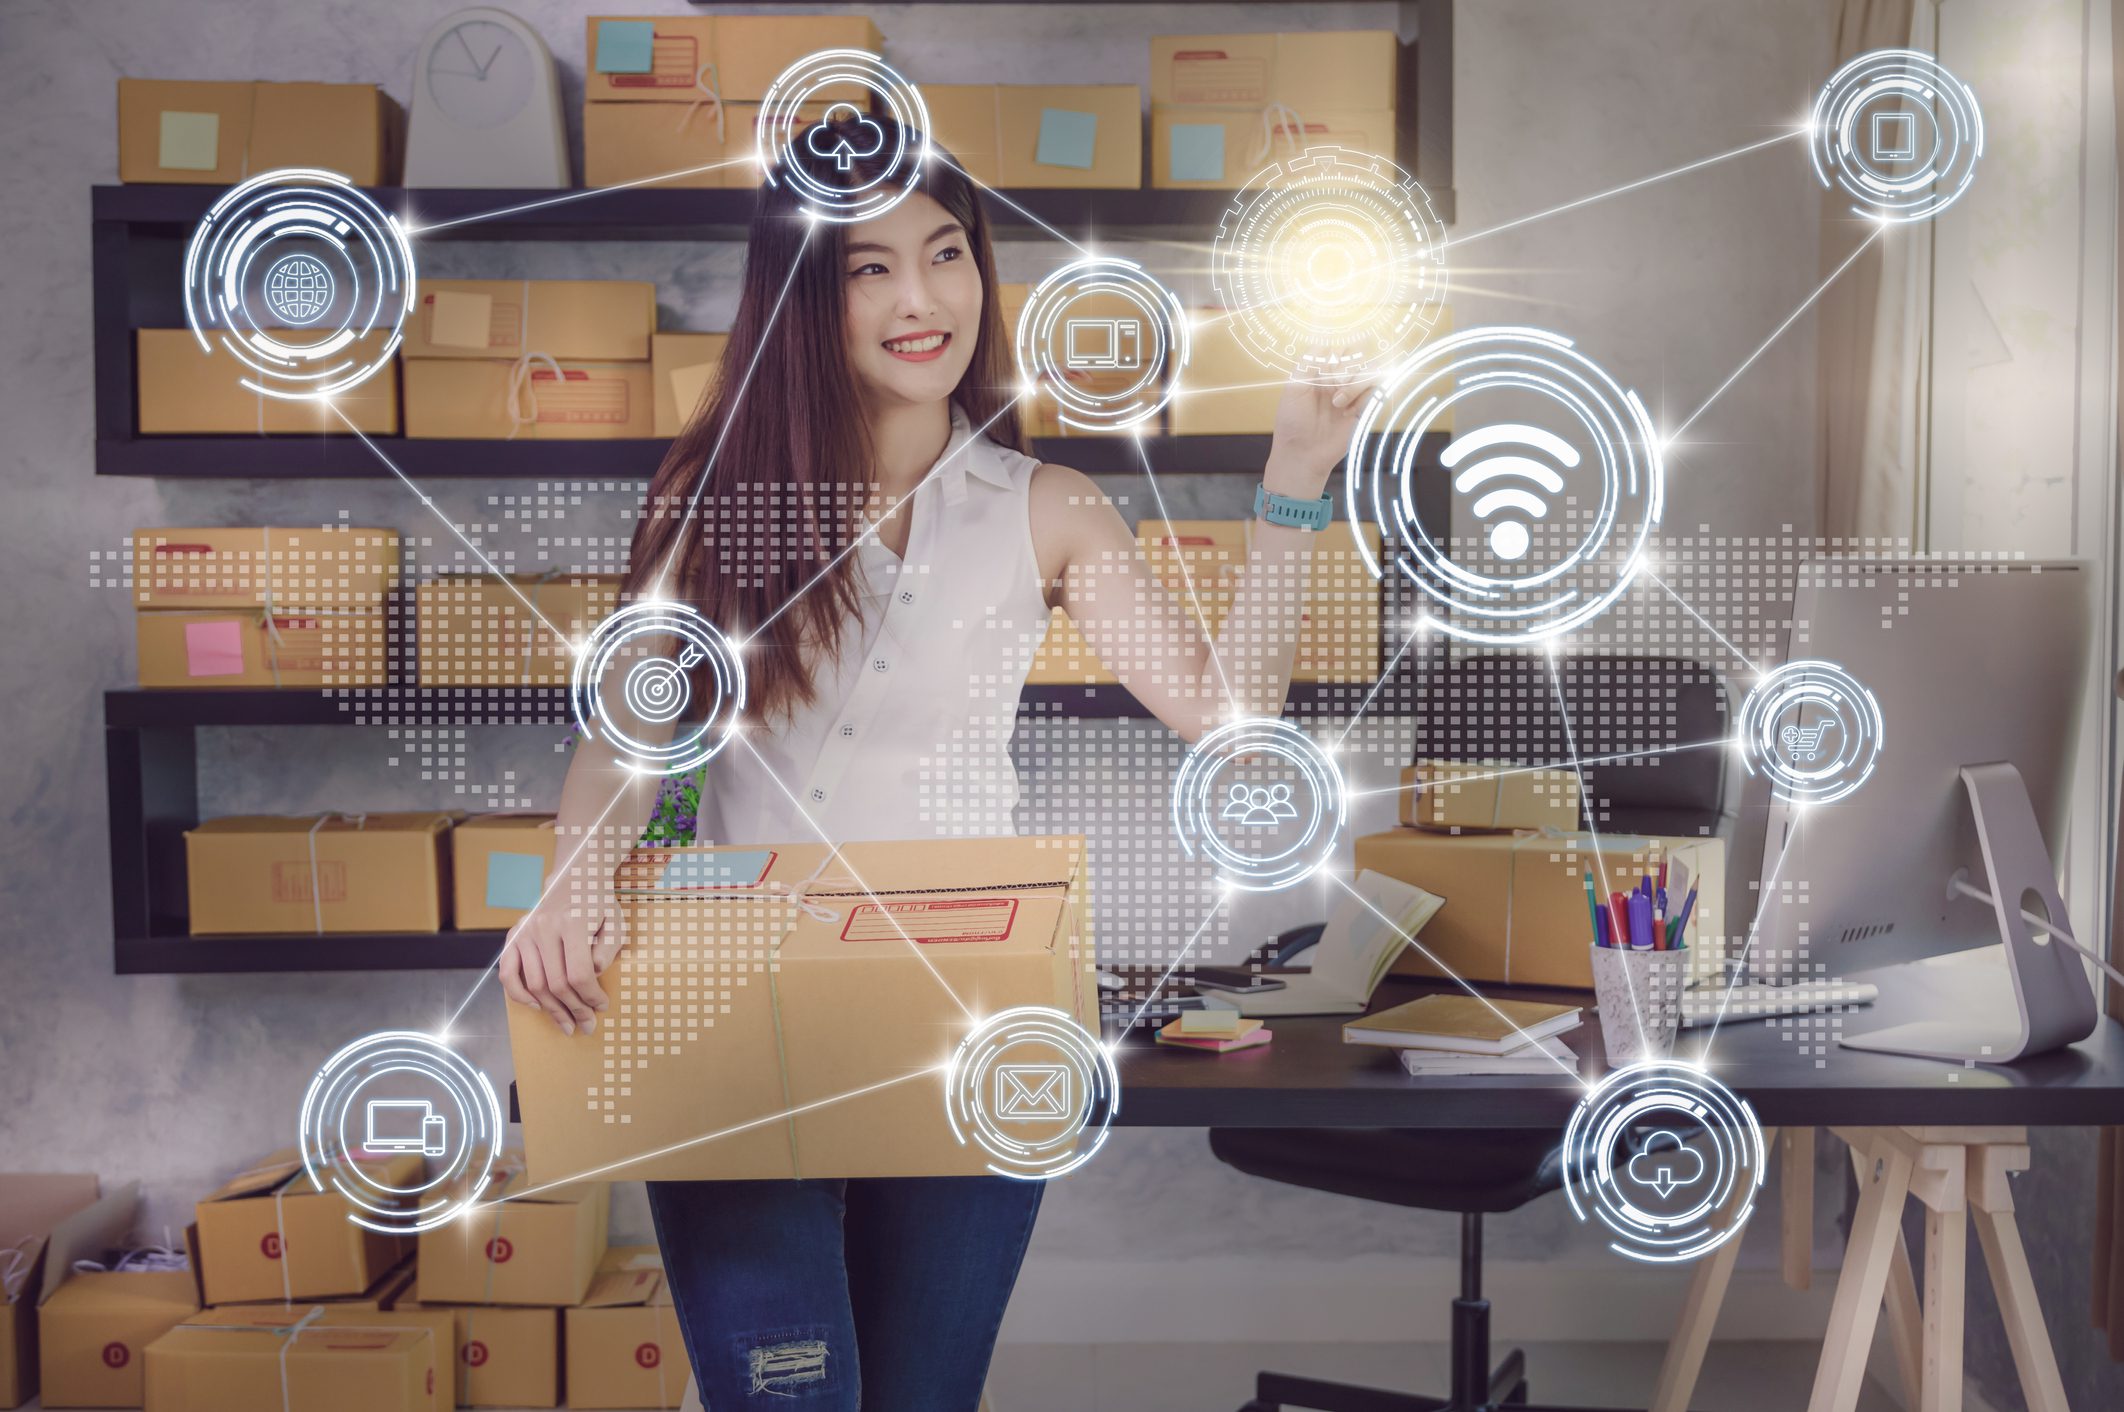 The power players of retail transformation: IoT, 5G, and AI/ML on Microsoft Cloud